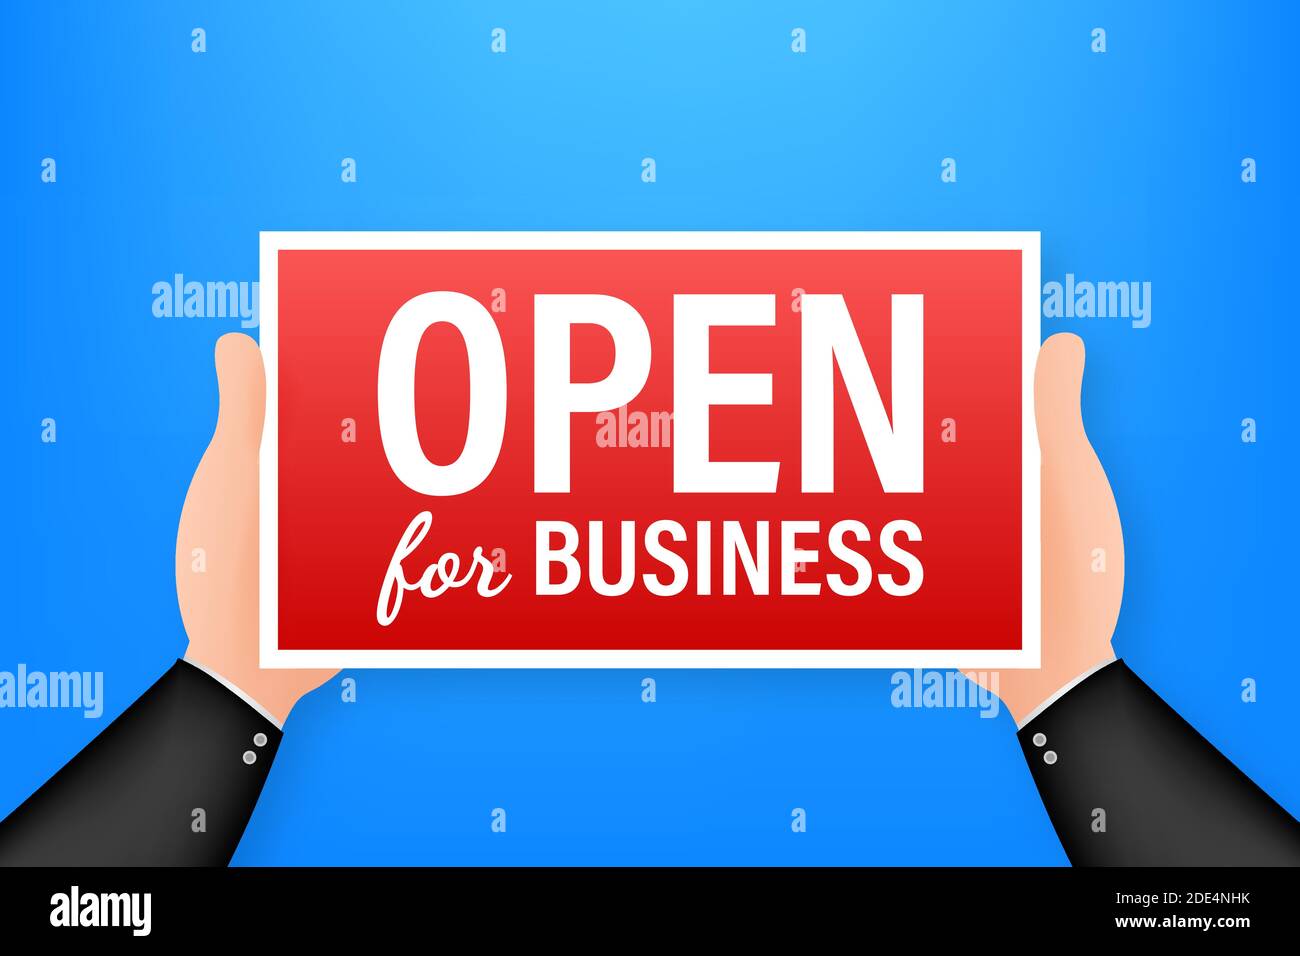 Open for business sign. Flat design for business financial marketing banking advertisement office people life property stock fund commercial Stock Vector